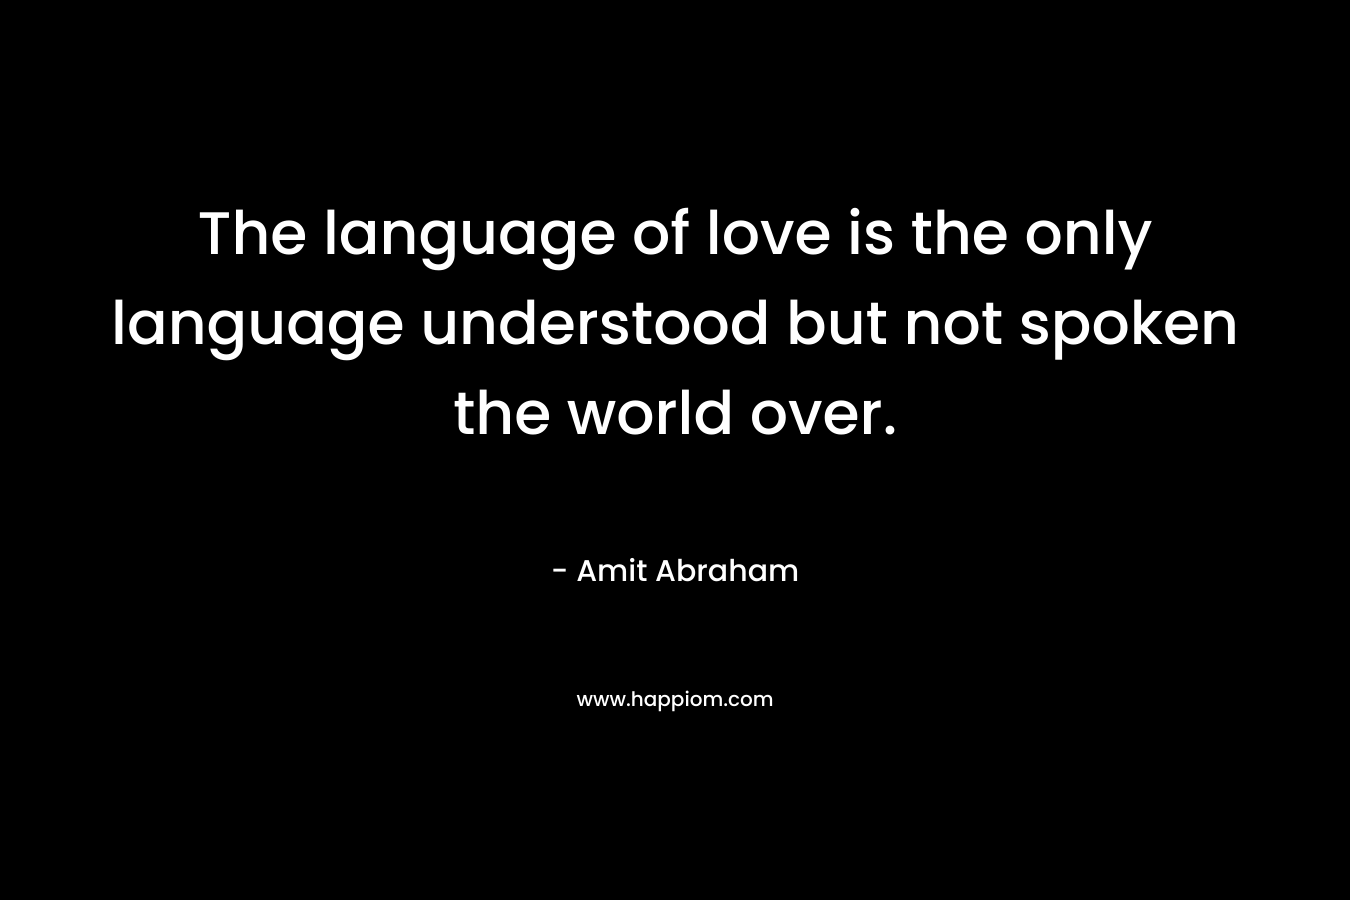 The language of love is the only language understood but not spoken the world over.